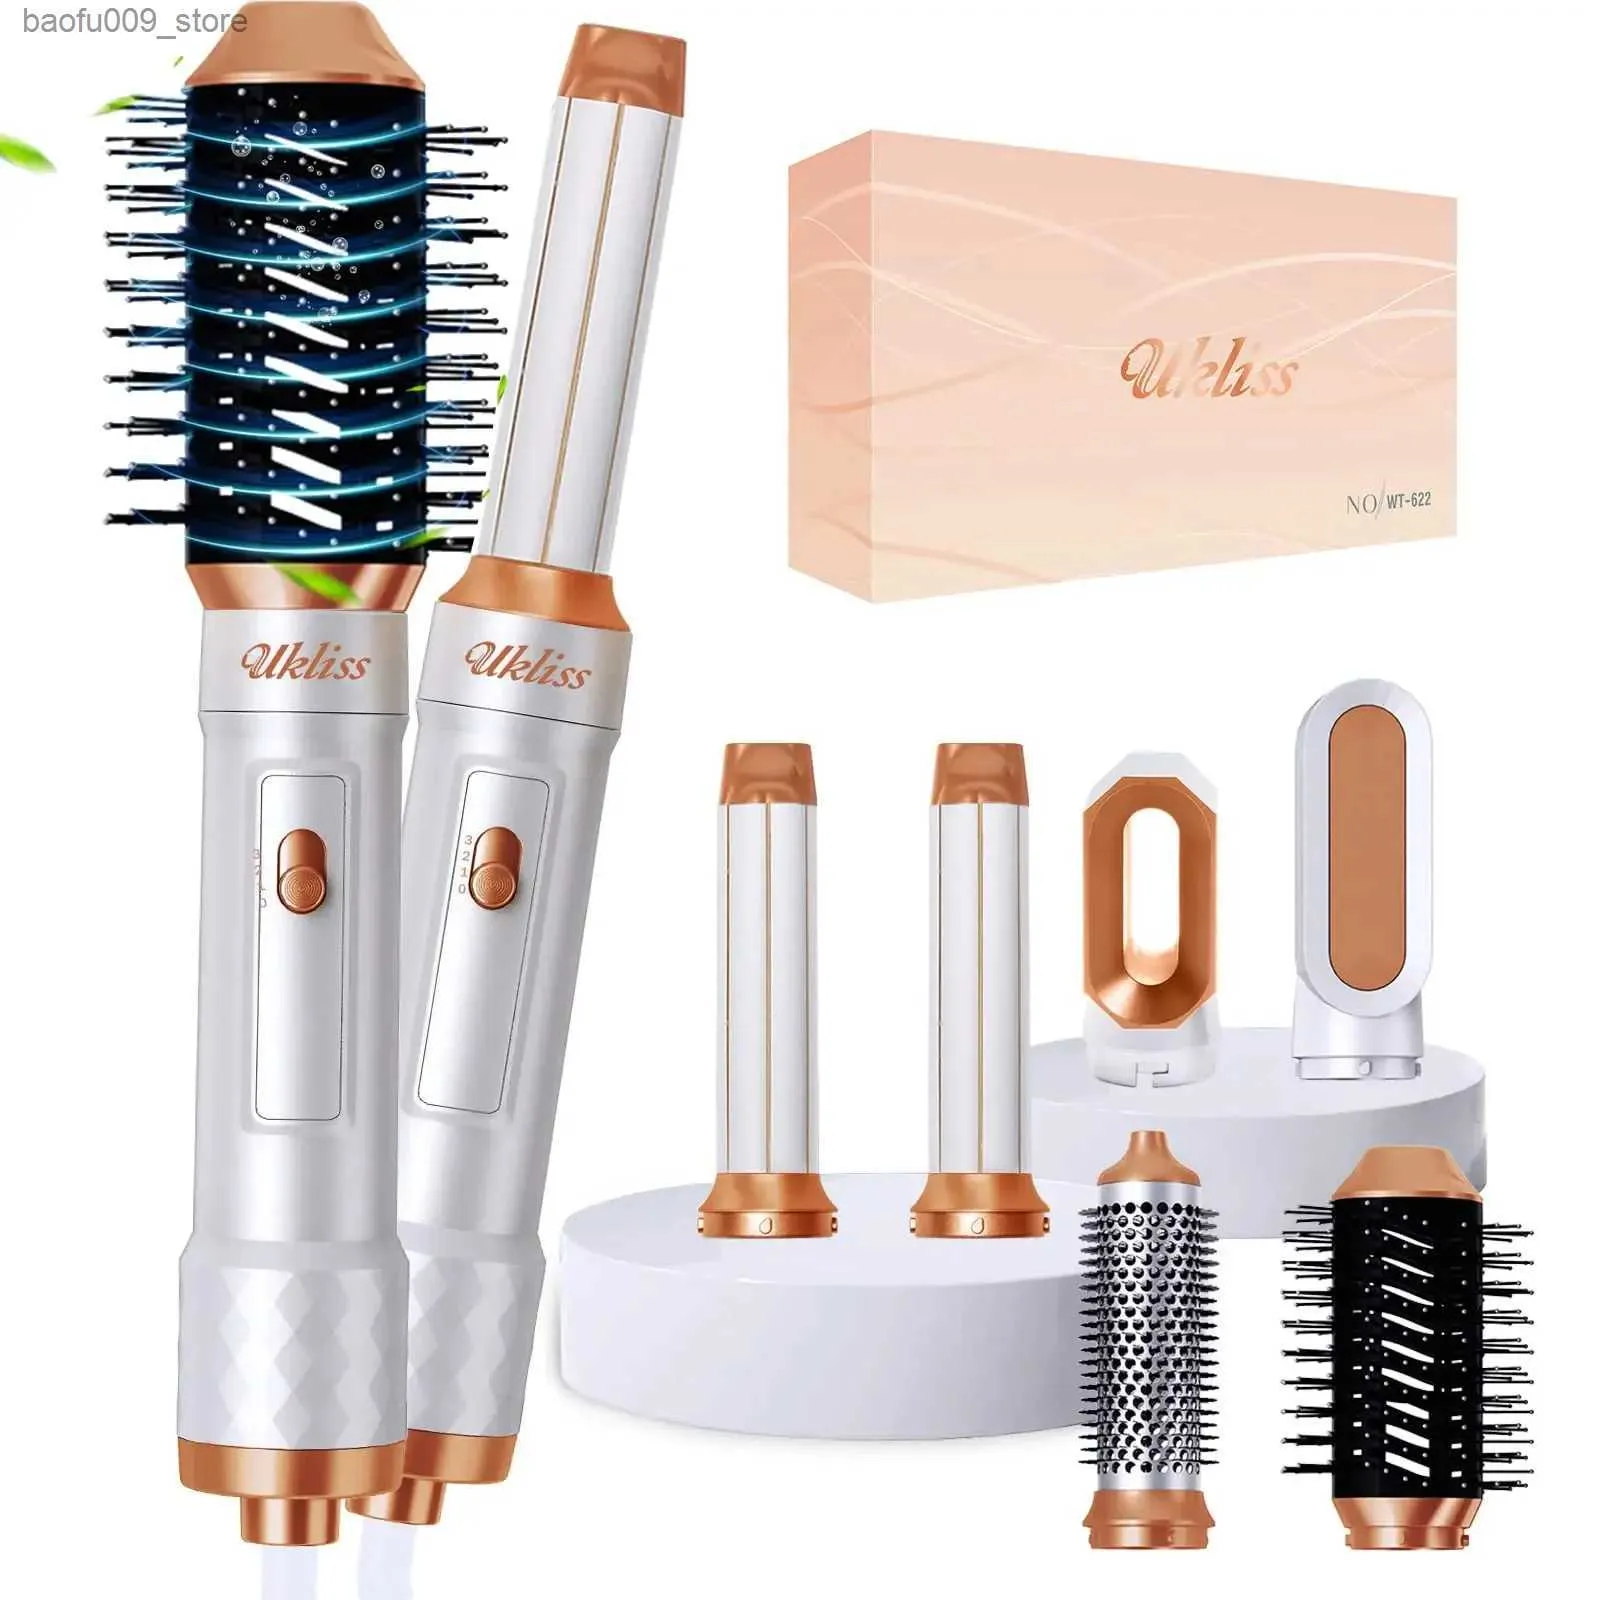 Curling Irons Ukliss 6-in-1 electric hair dryer platinum hair dryer comb curling rod detachable brush kit negative ion curler Q240425